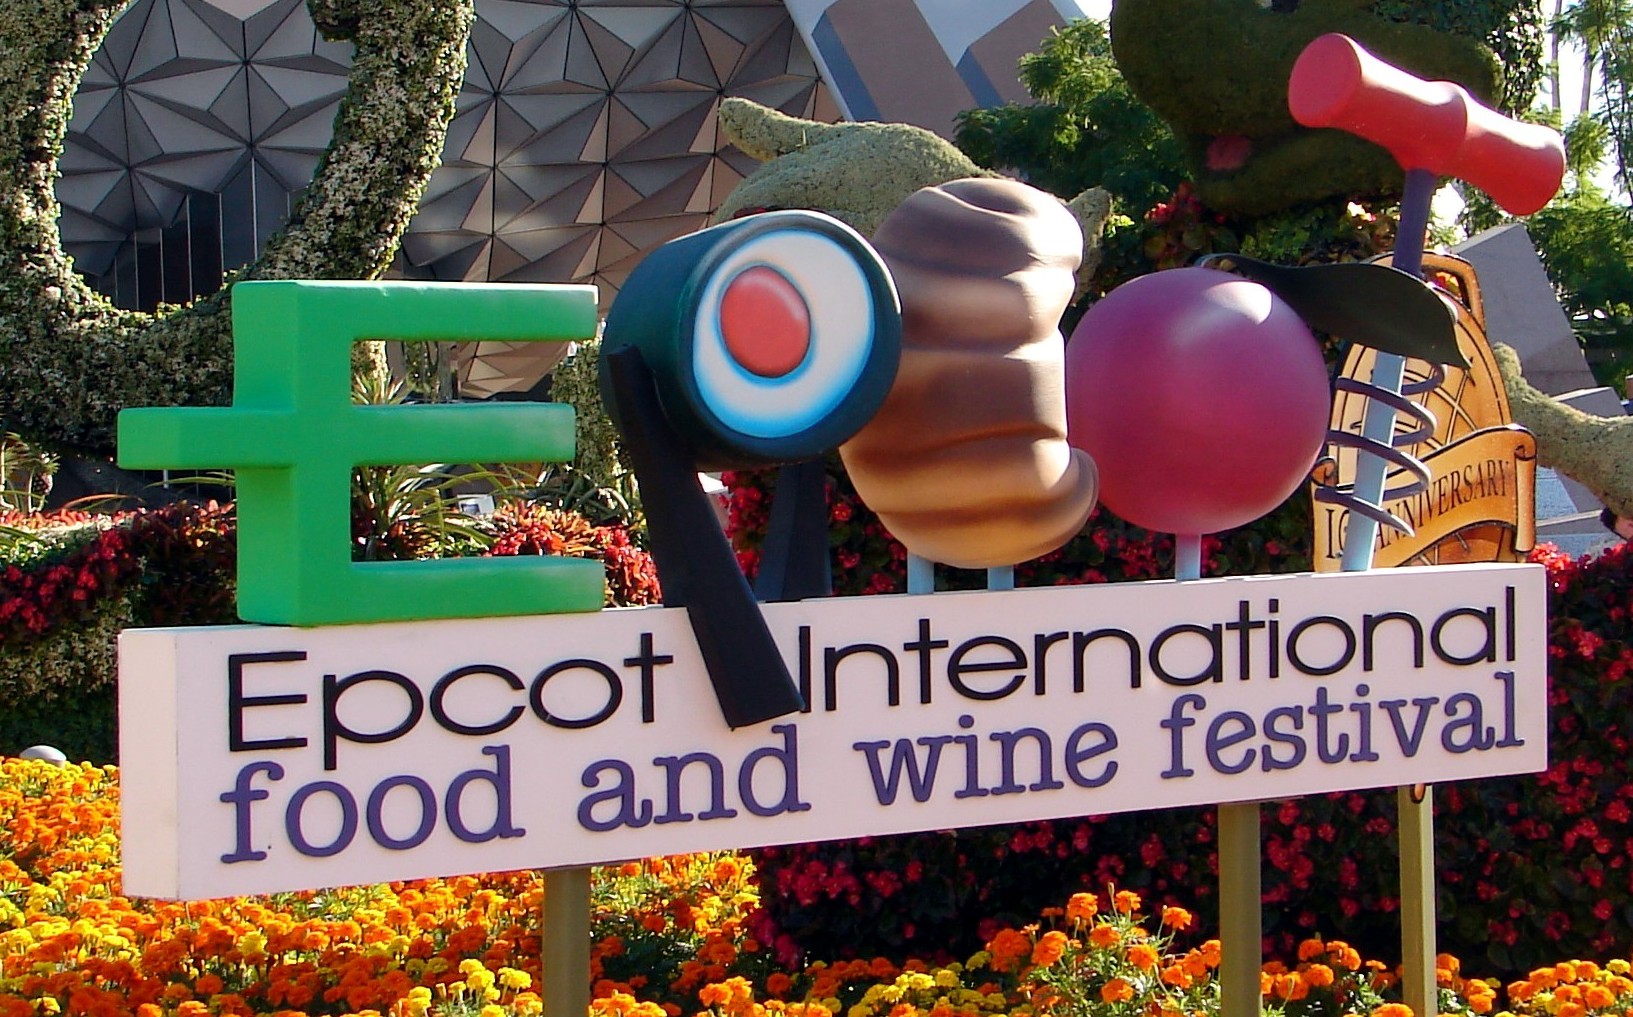 Are You Ready for the Food and Wine Festival? English blog